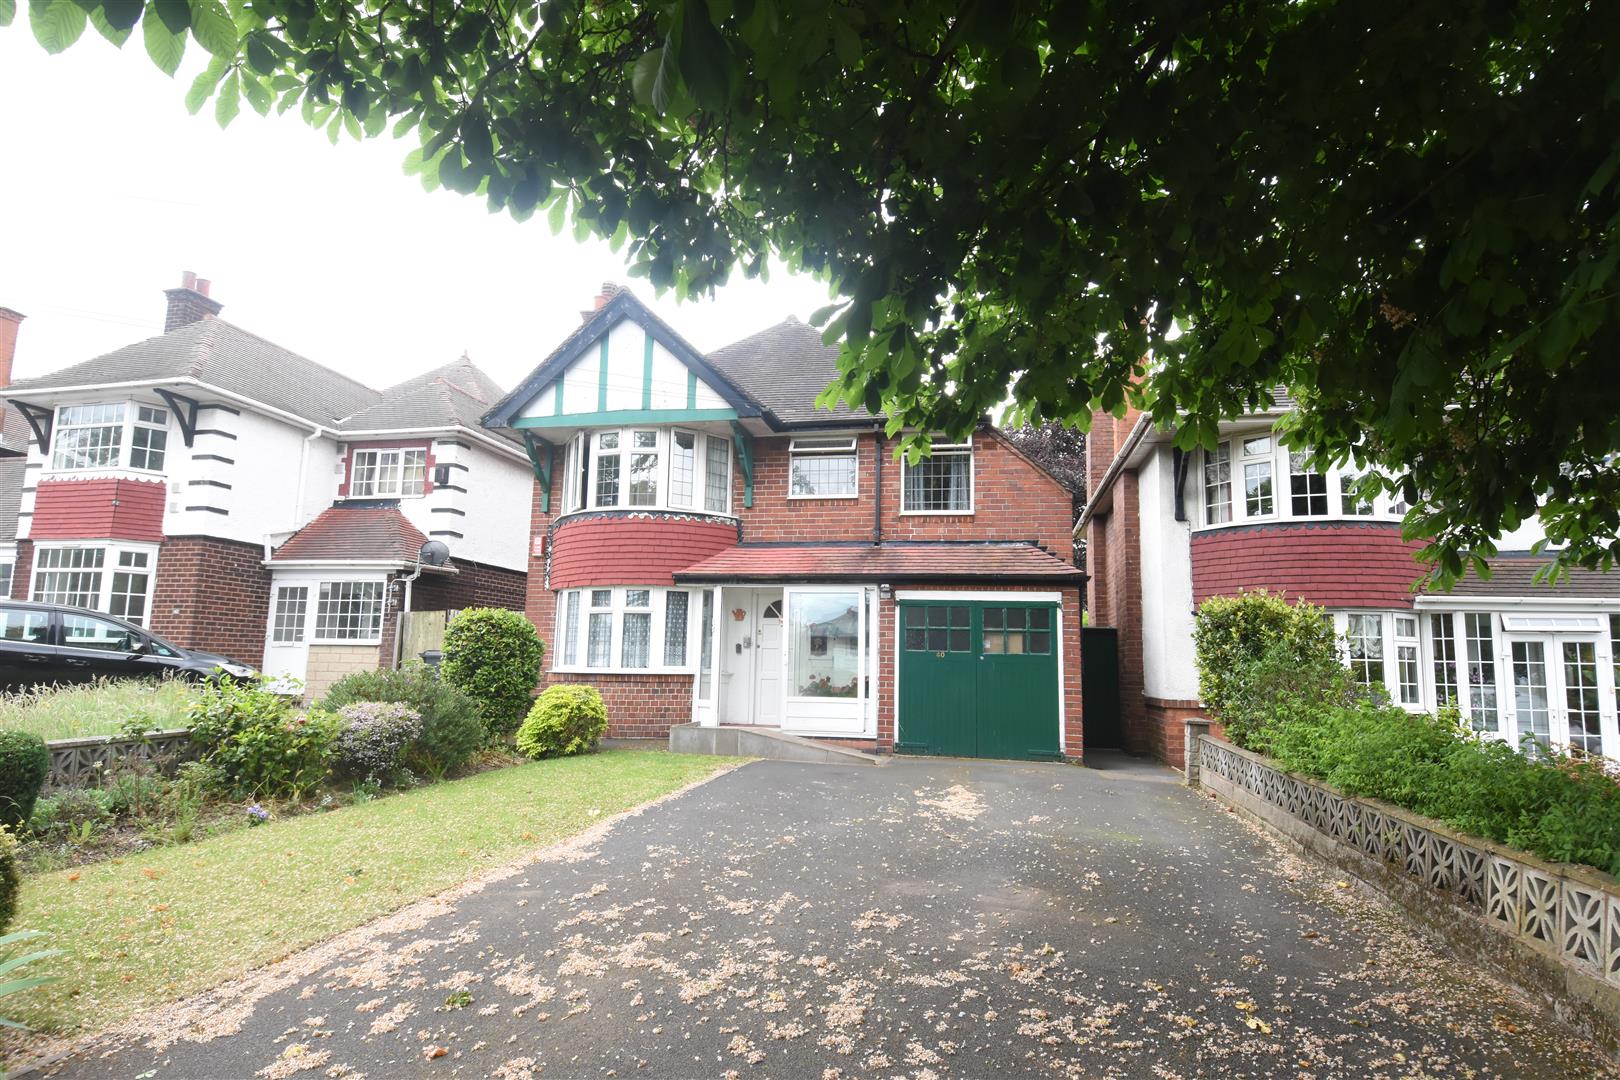 4 bed house for sale in Coleshill Road, Hodge Hill, Birmingham, B36